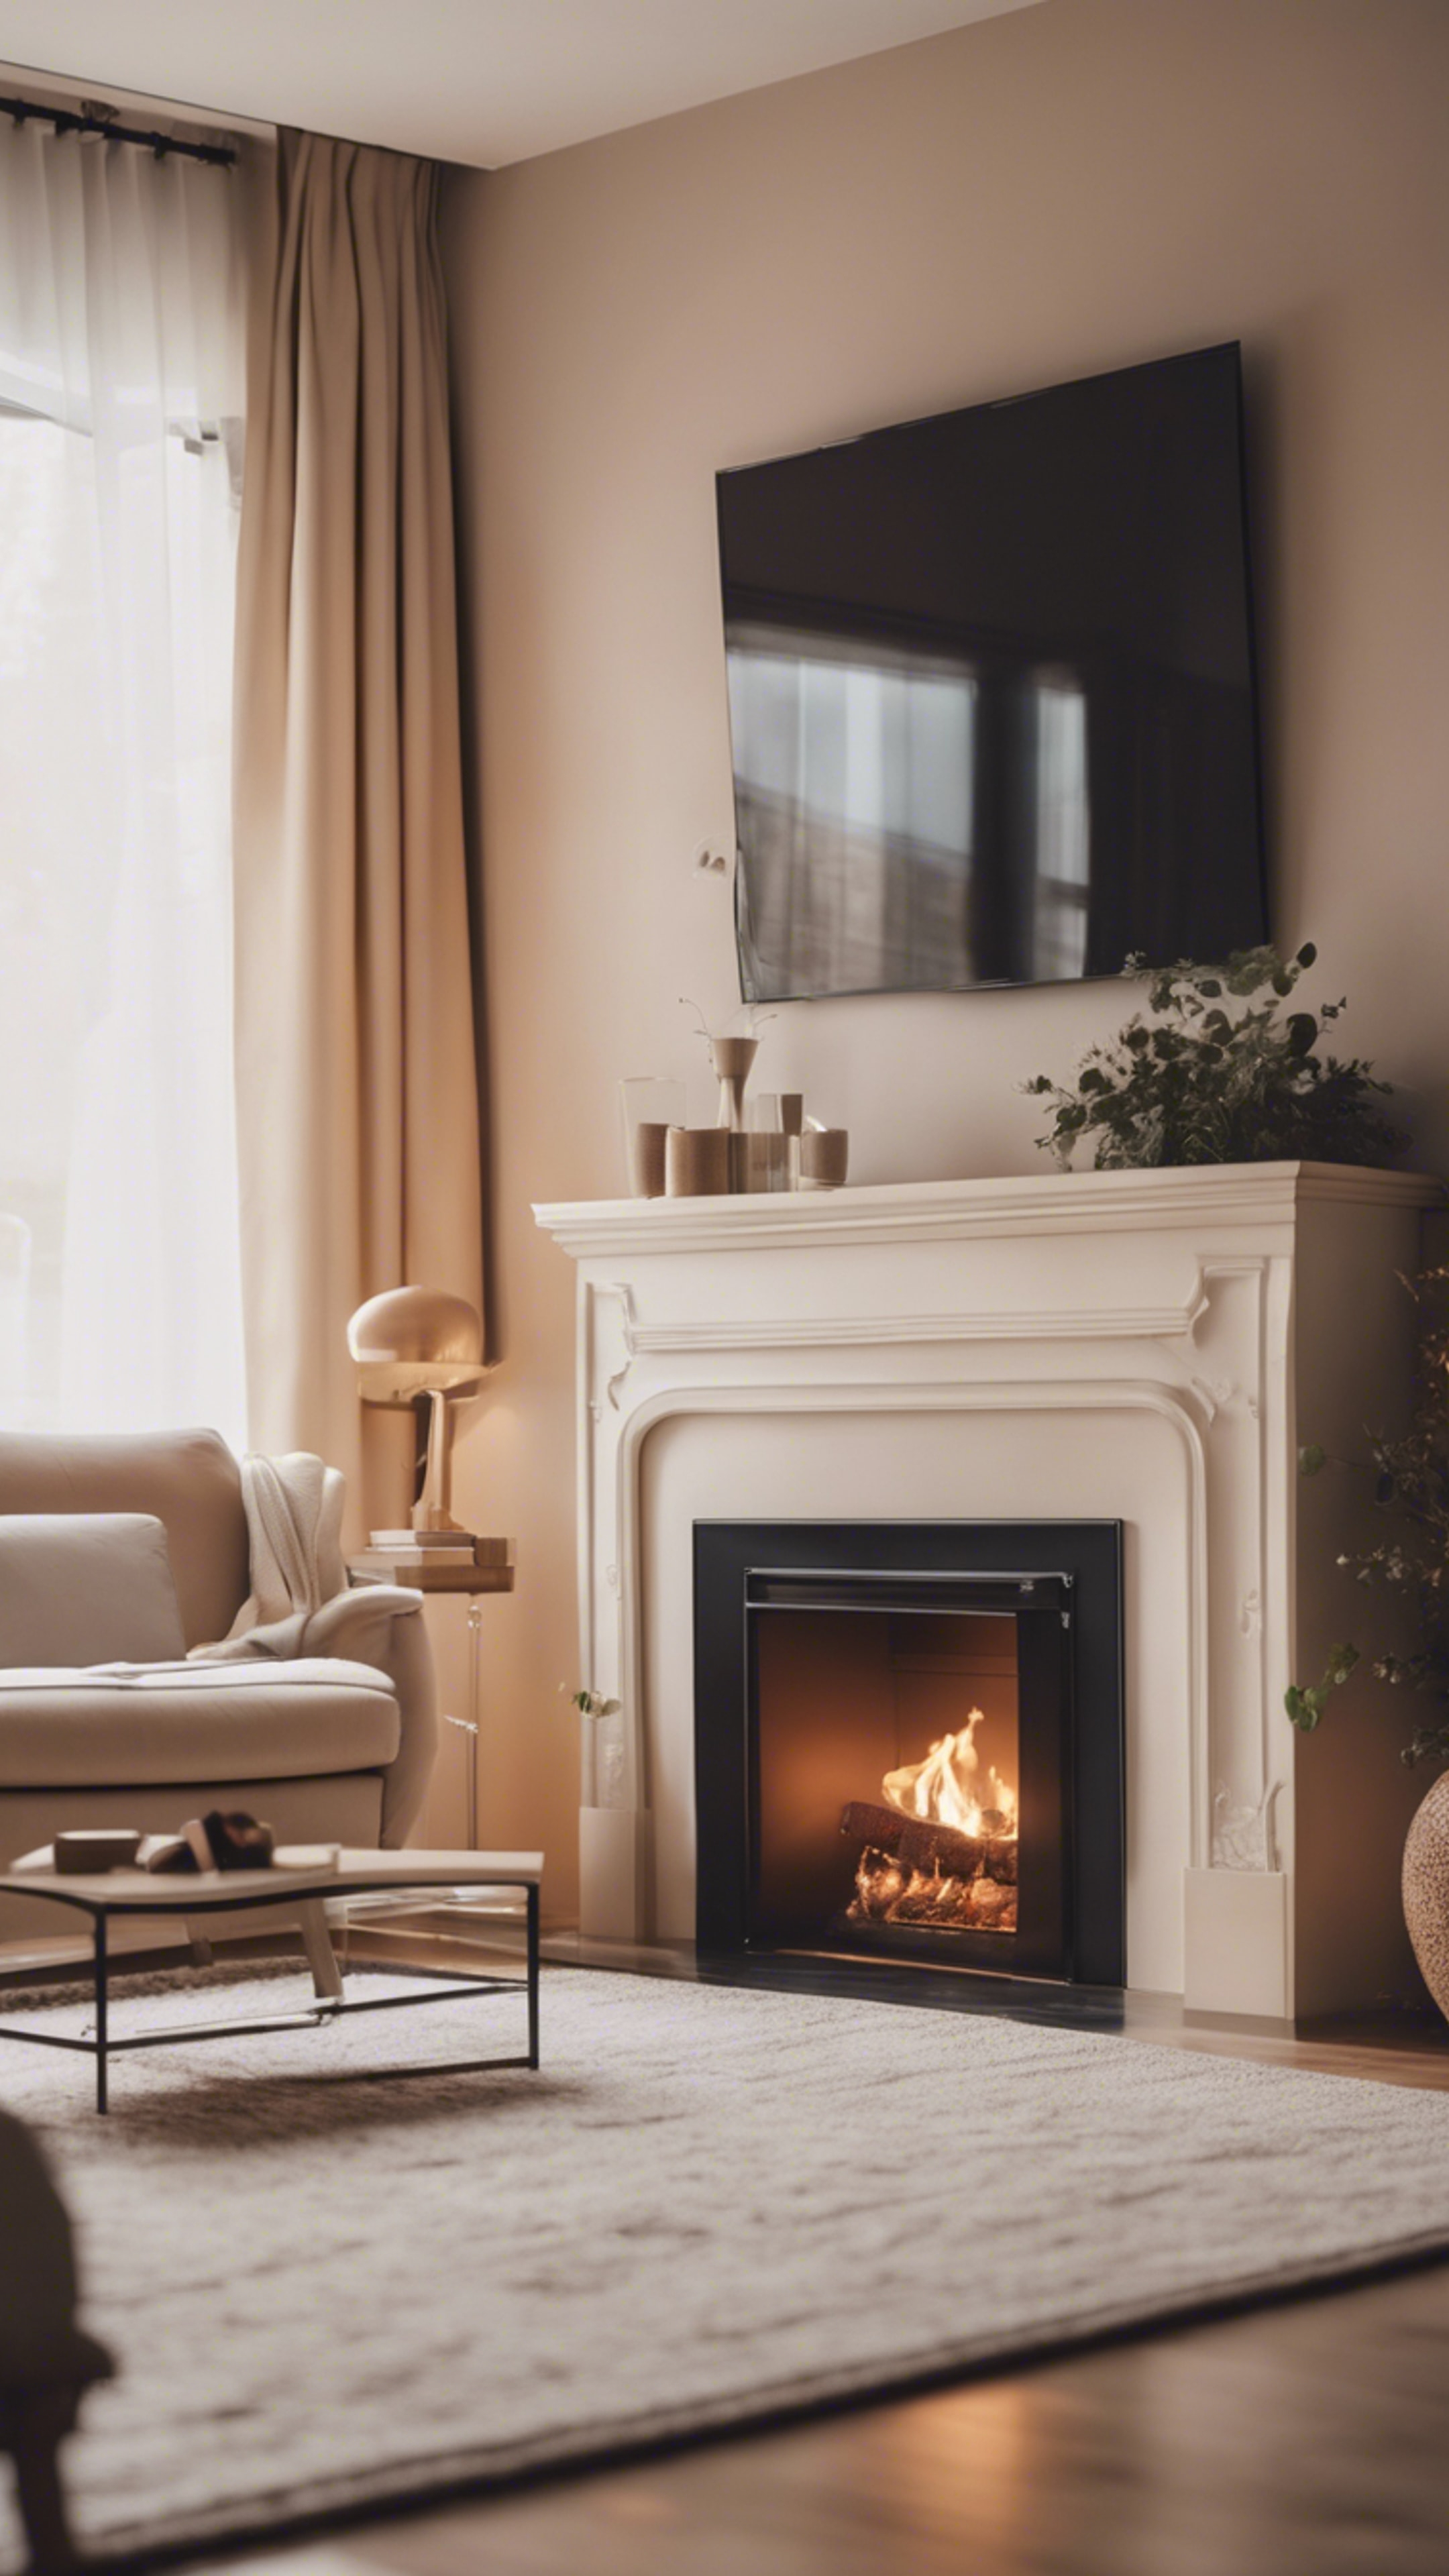 A cozy and tranquil cool beige living room with a fireplace alive with dancing flames. Валлпапер[fdd7e3460c134e479b57]